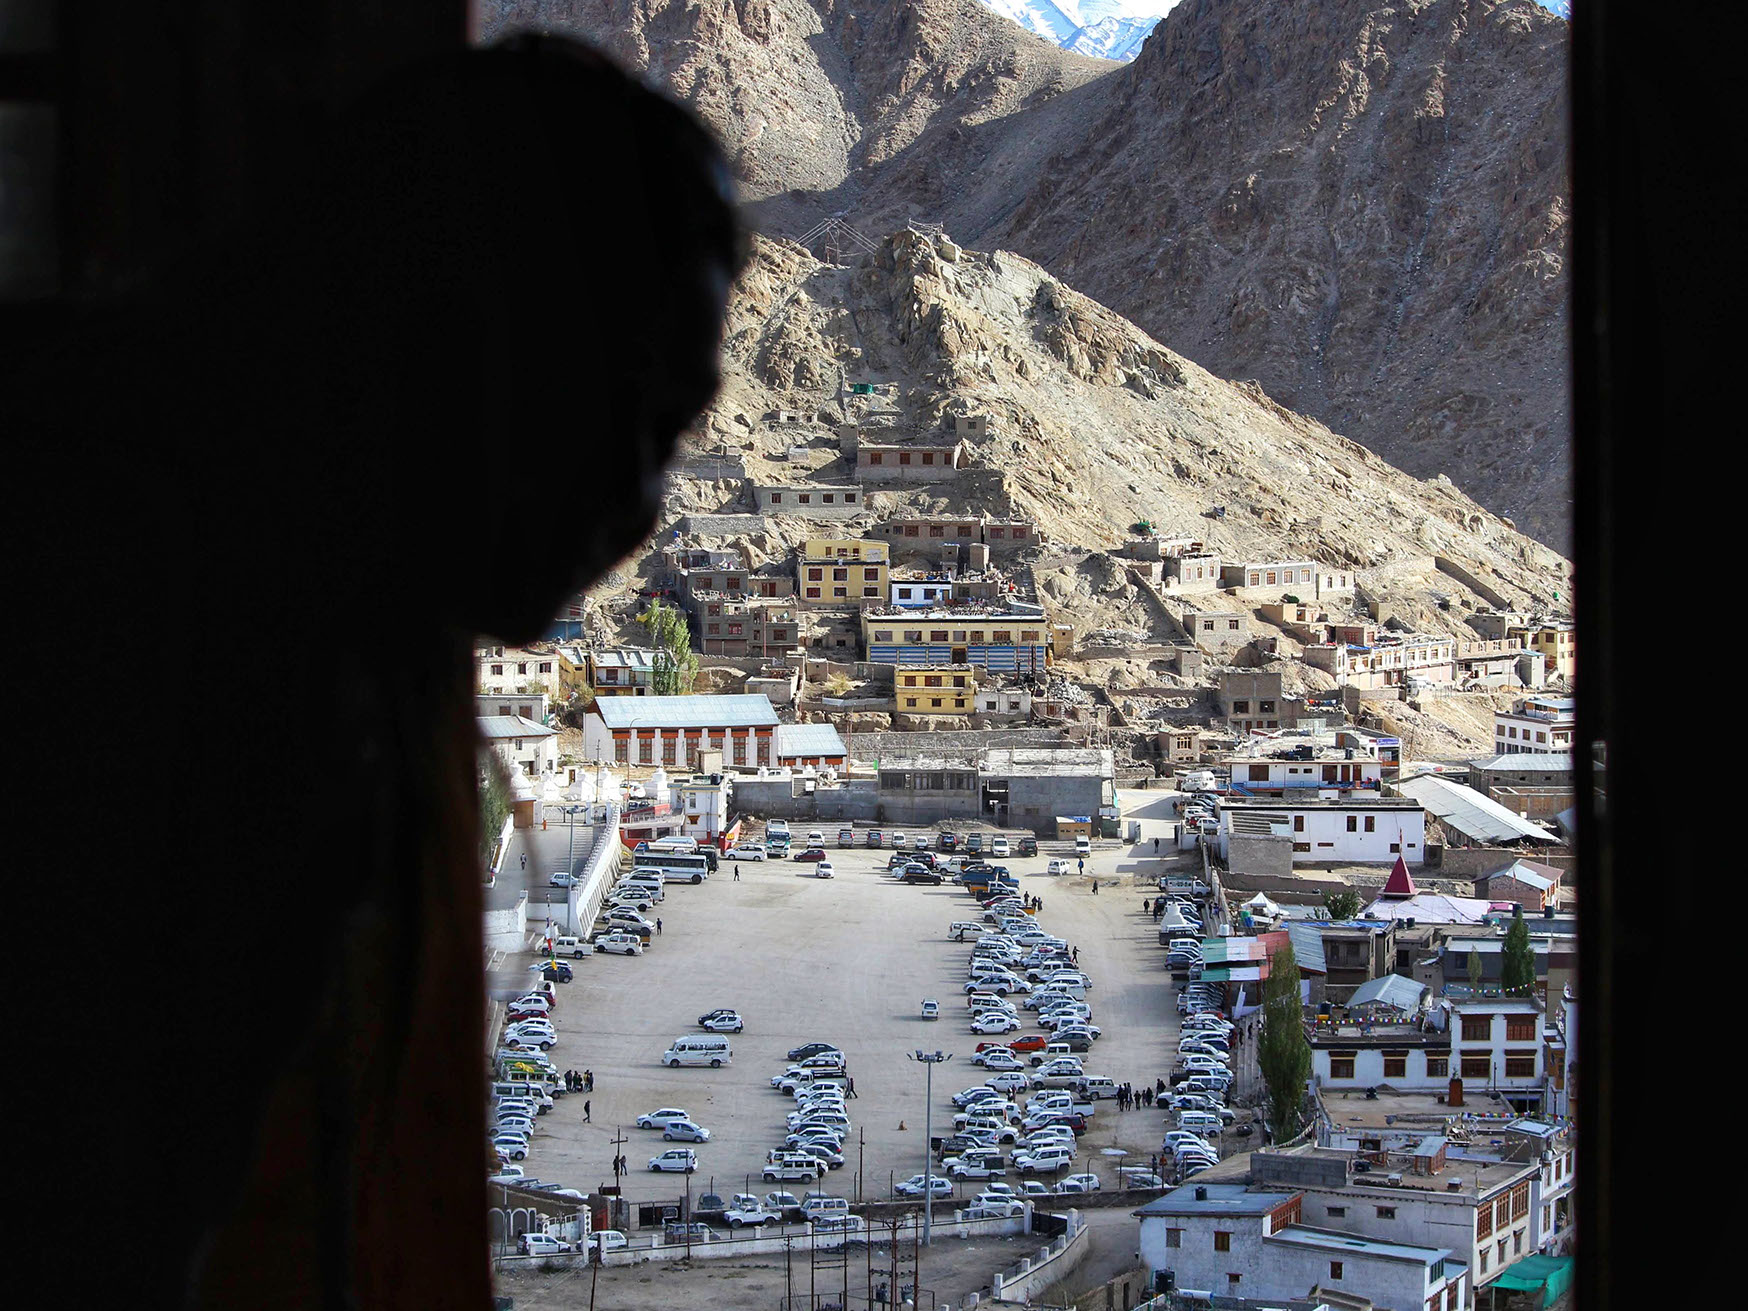 View of the opposing mountains from the inside of the Leh stok palace